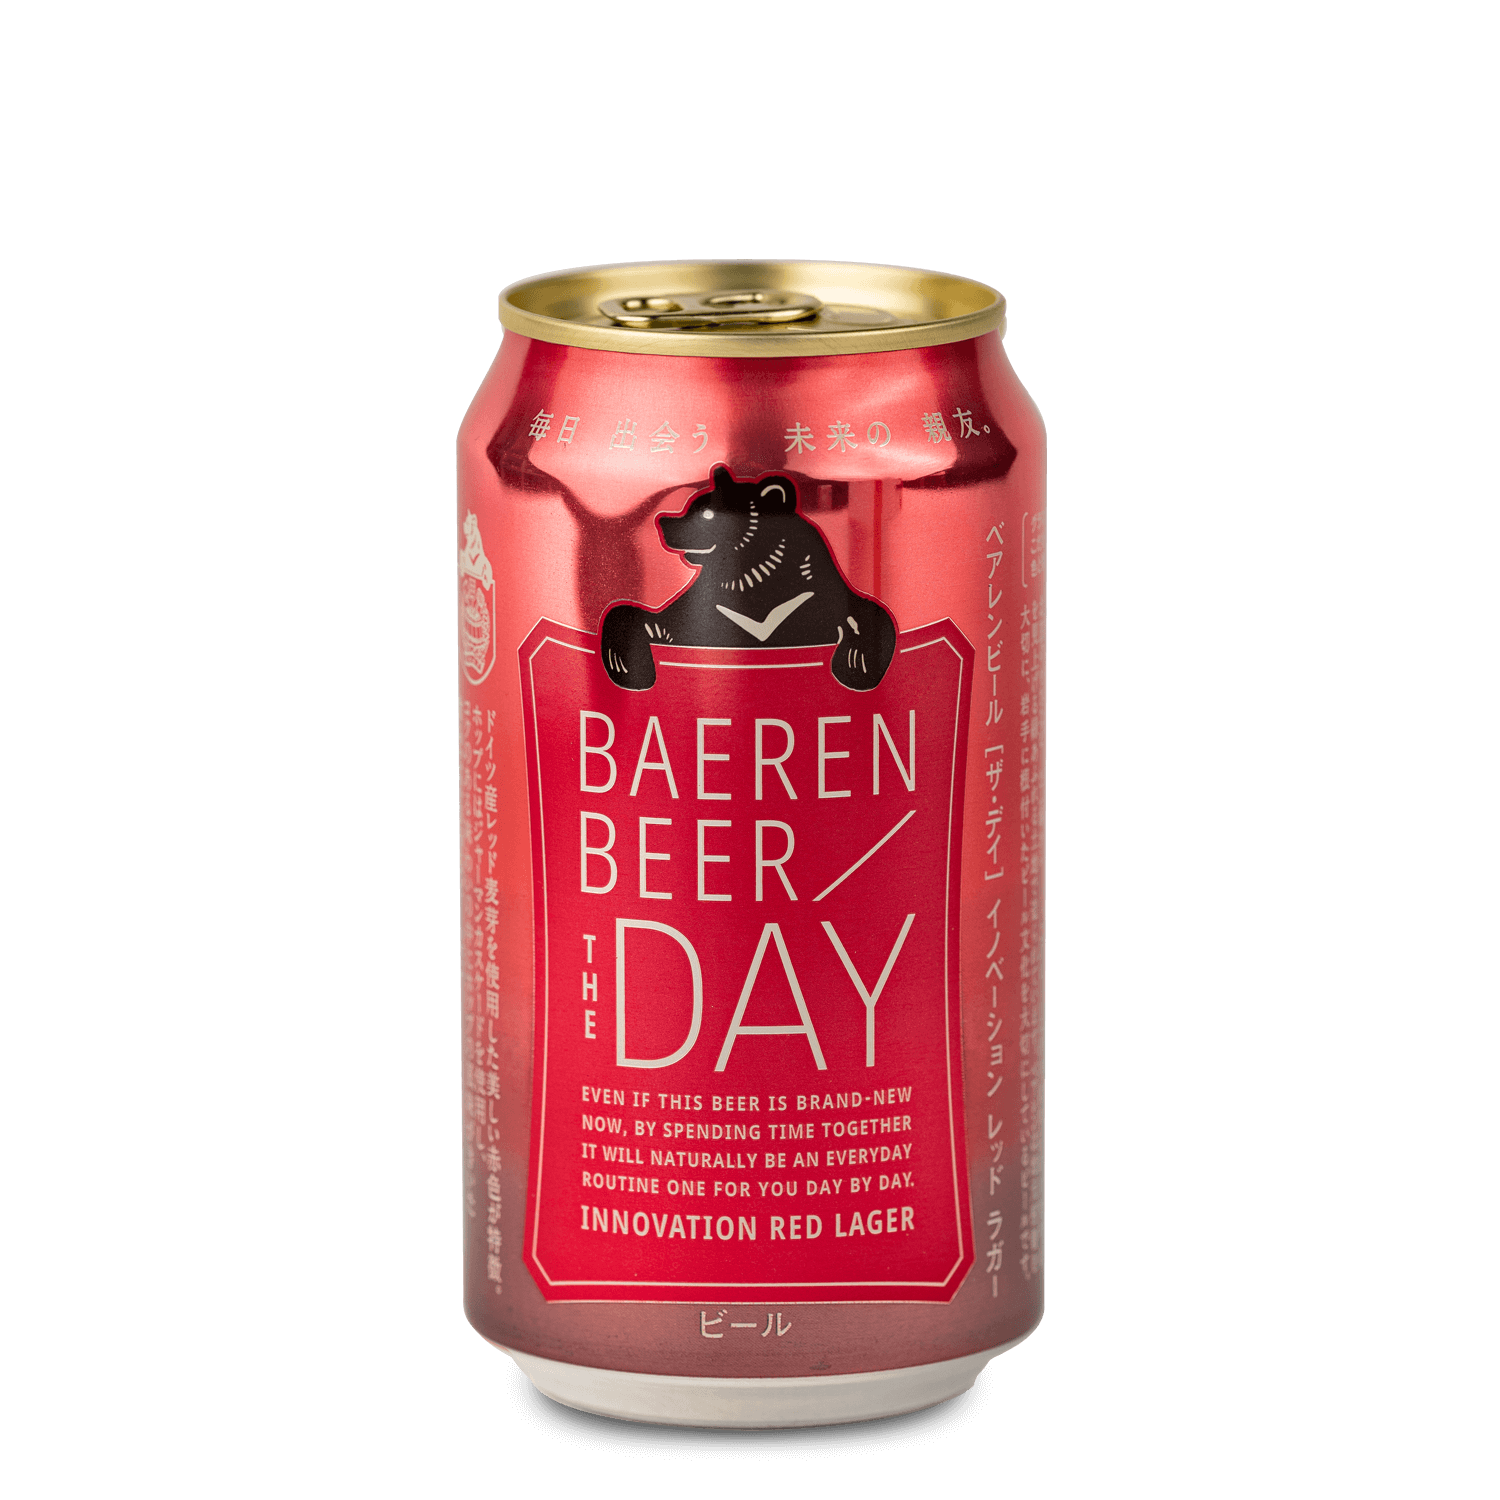 *BAEREN 'THE DAY' RED LAGER BEER 12 x 350ml